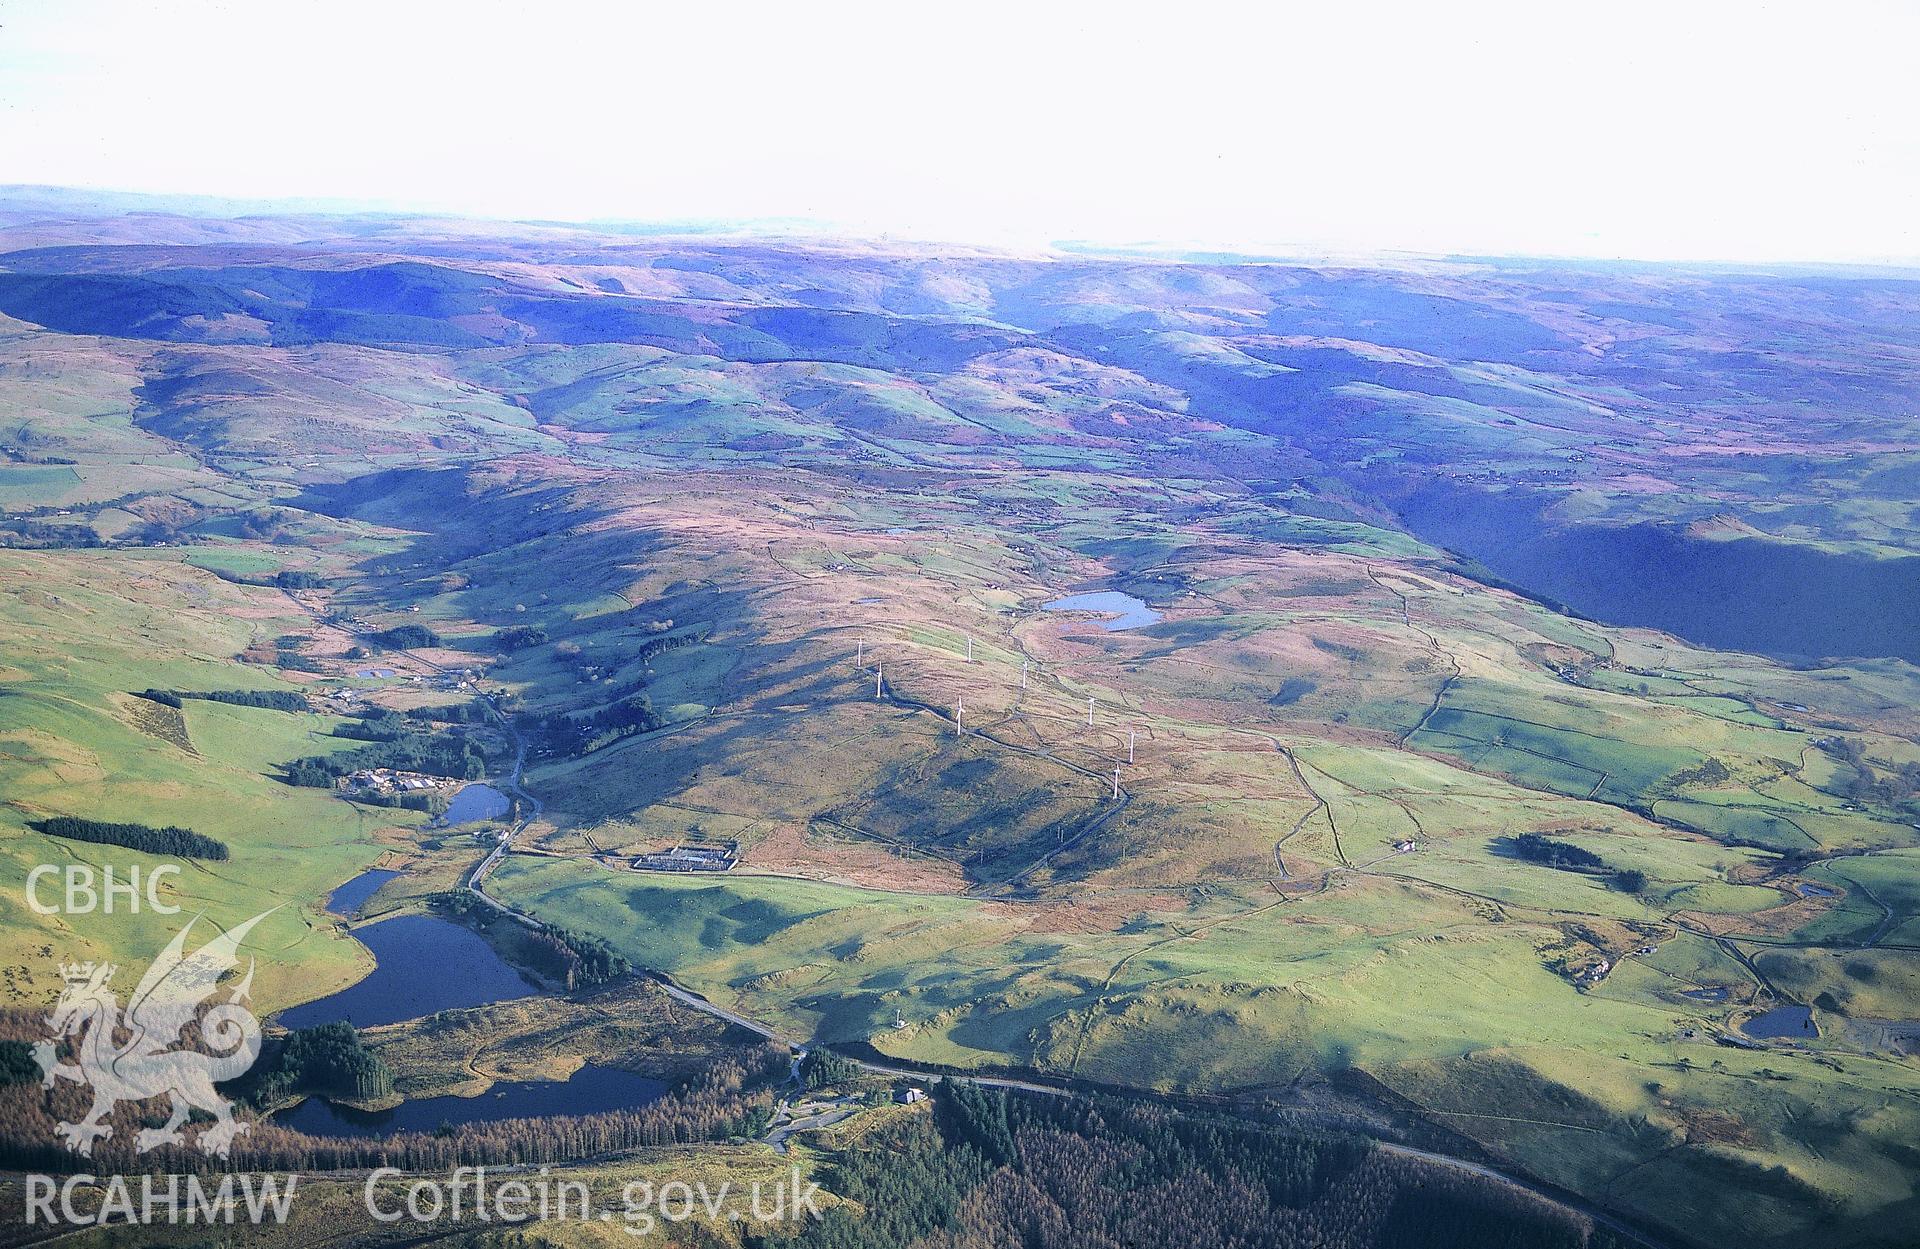 Slide of RCAHMW colour oblique aerial photograph of Nant yr Arian Landscape, taken by T.G. Driver, 13/2/2001.